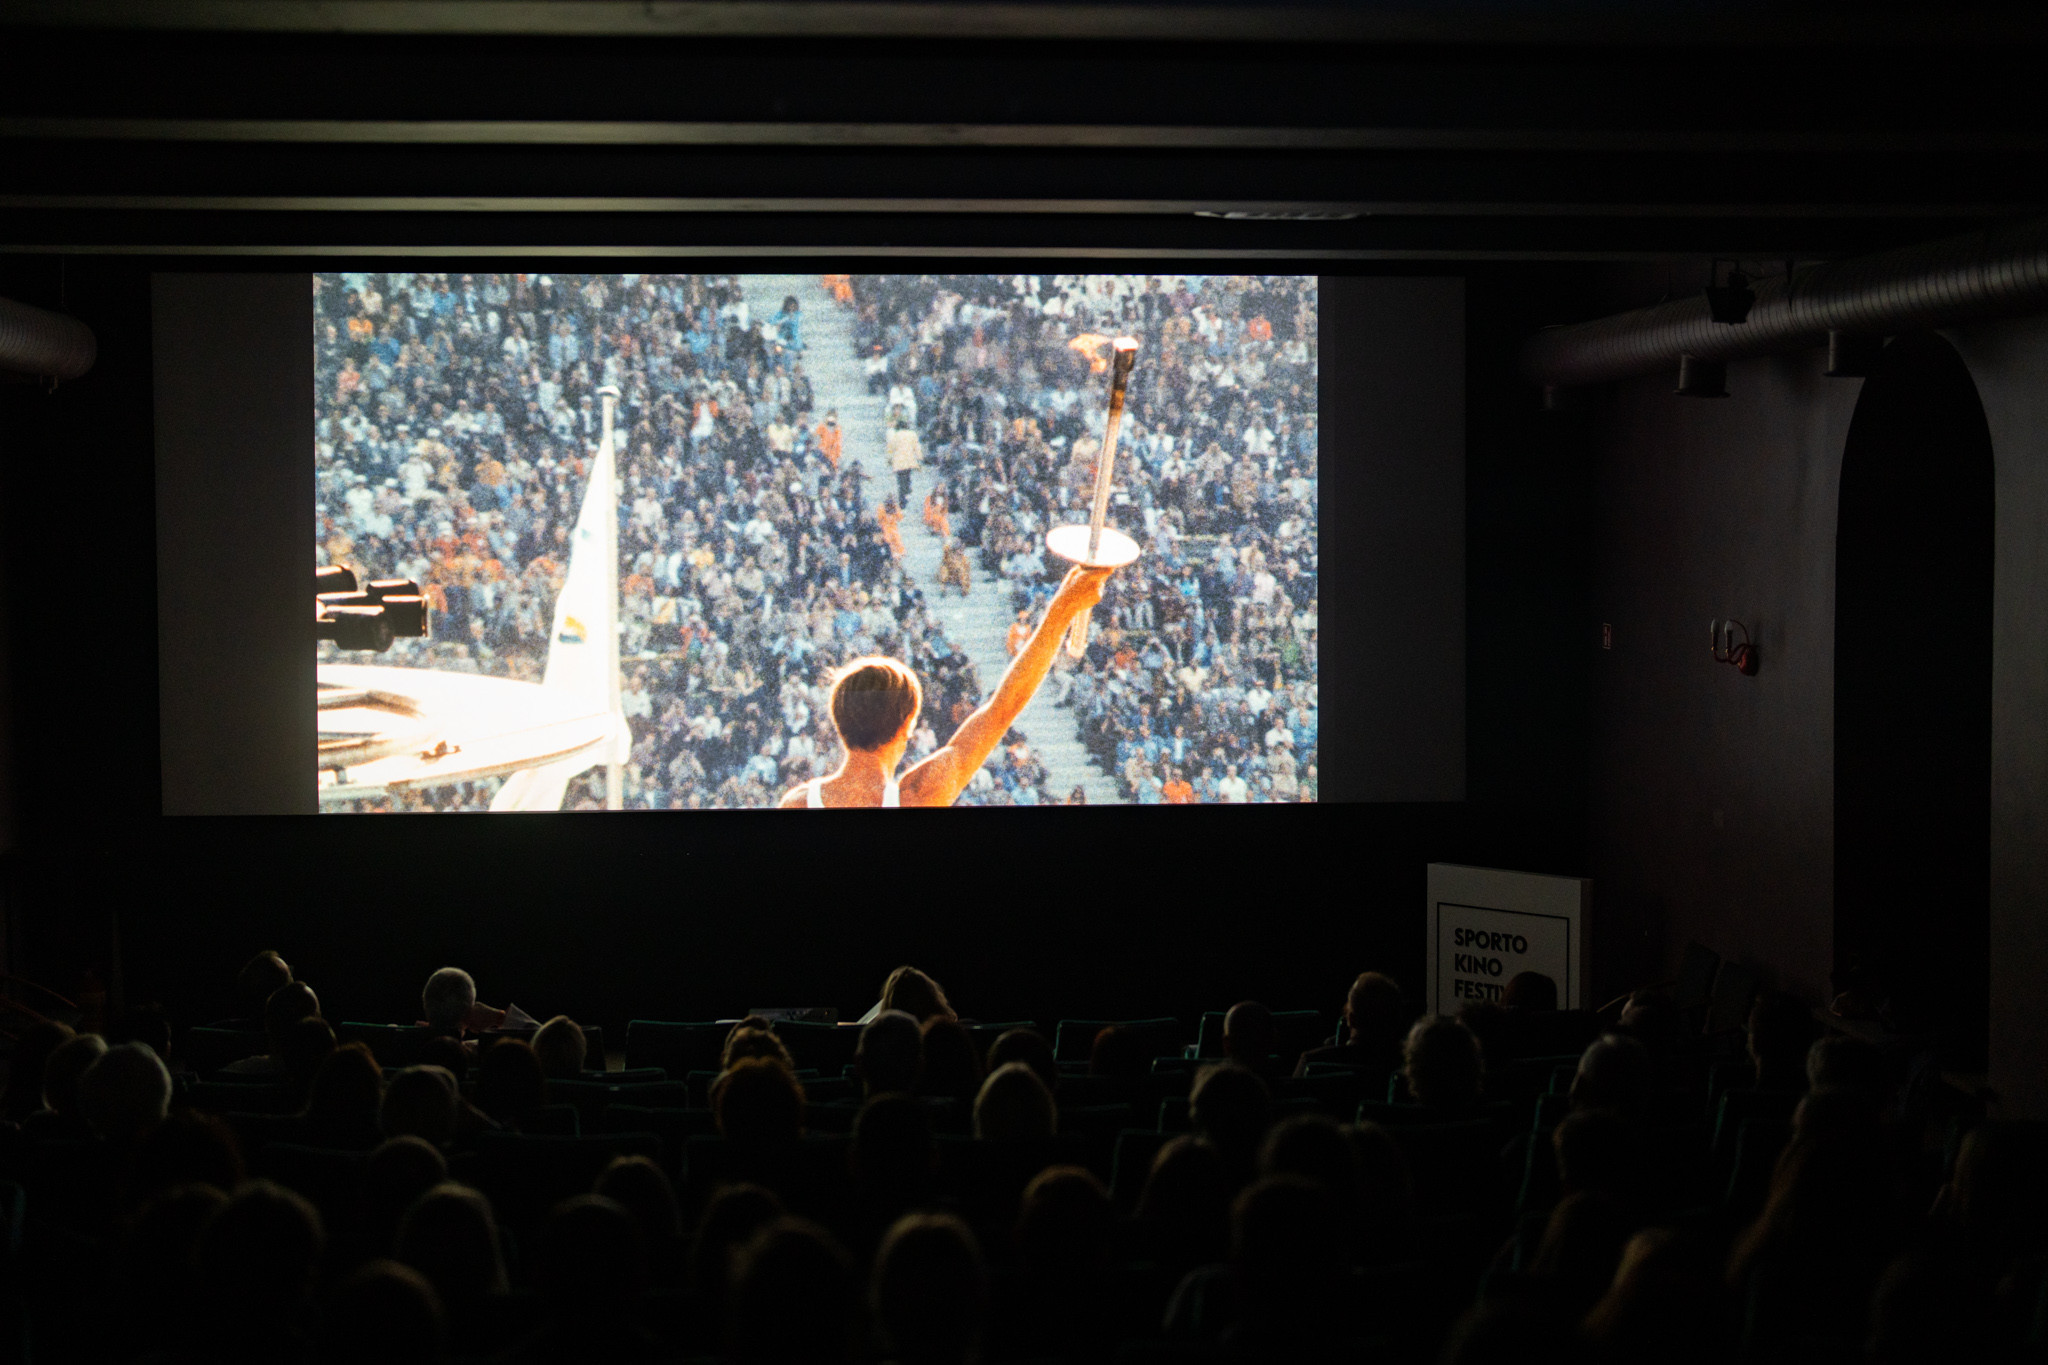 The Sports Film Festival began with a showing of Visions of Eight to commemorate the 50th anniversary of the Munich 1972 Olympic Games ©LNOC/Vytautas Dranginis